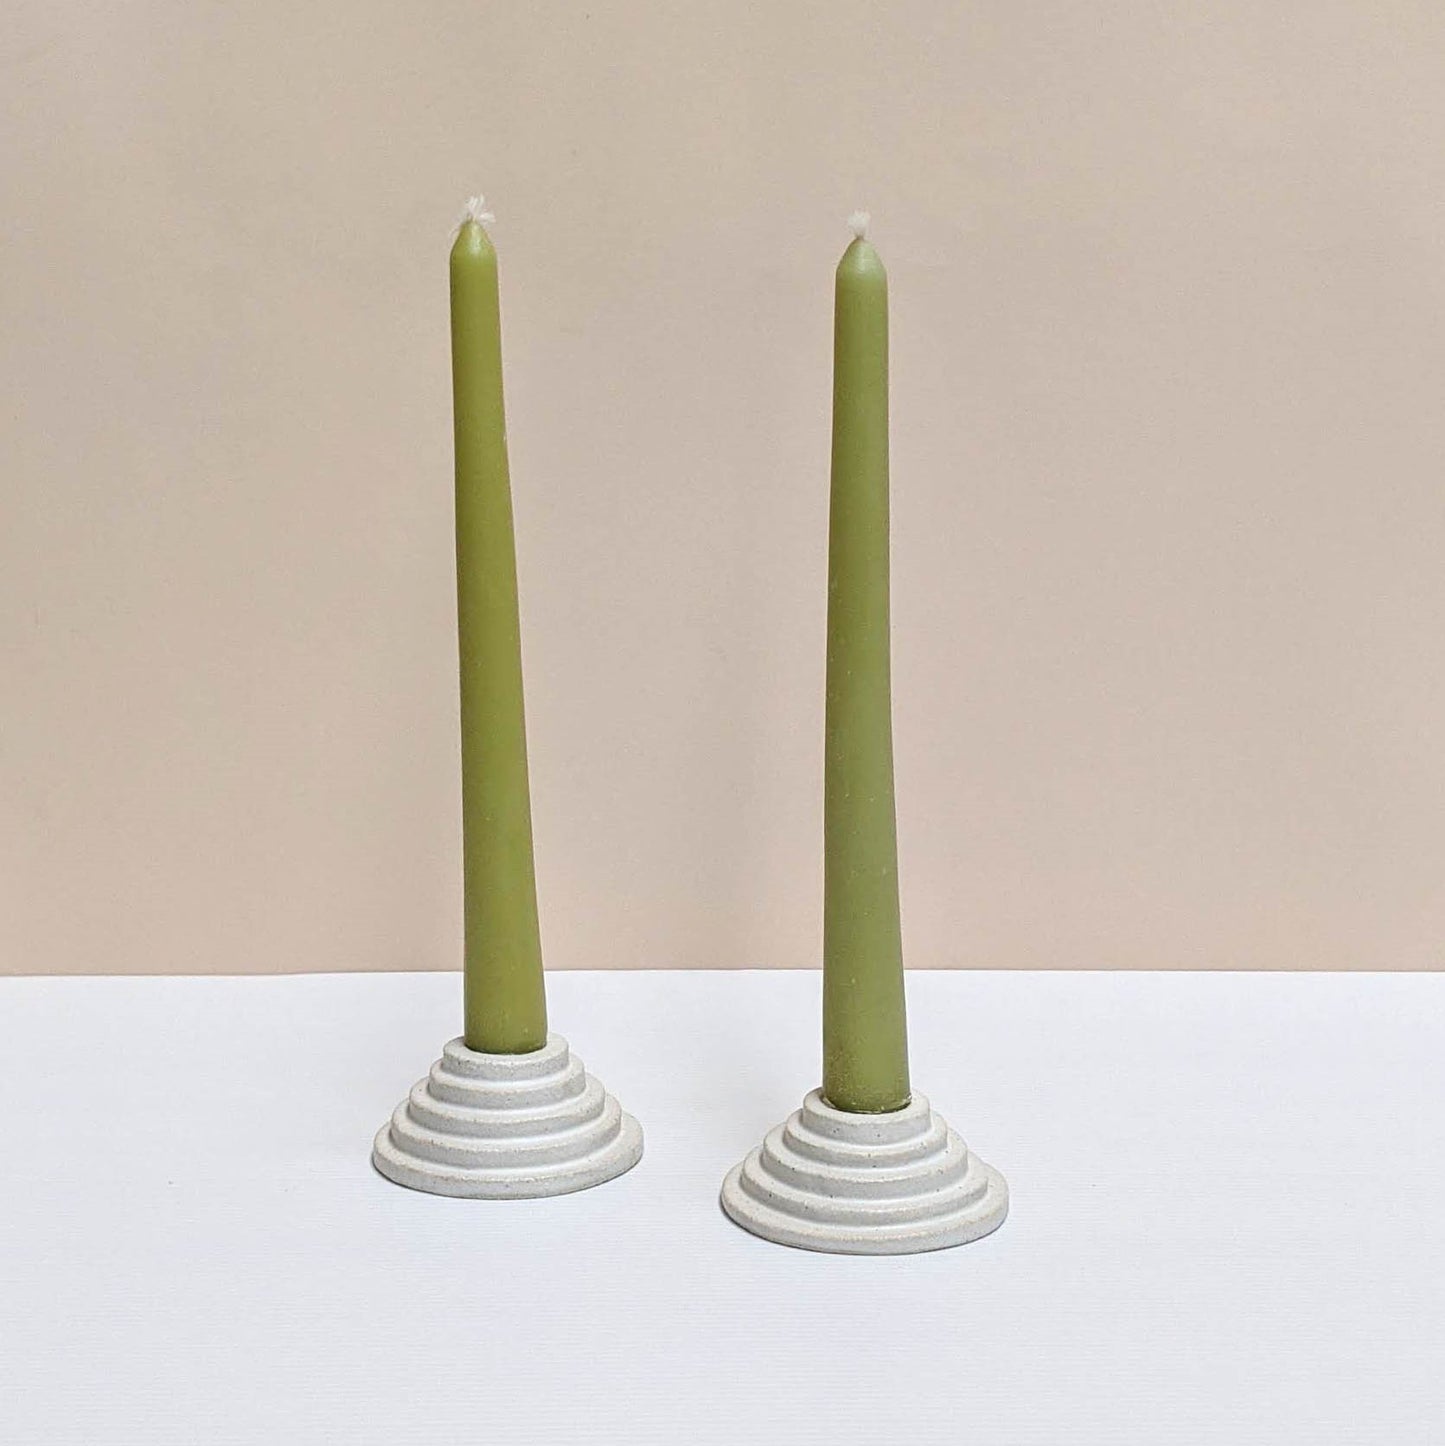 Two circular ceramic candle holders in white glaze.  Each candle features steps leading up to the candle. Both of the candle holders have green unlit candles and are sitting on a white and cream backdrop. 